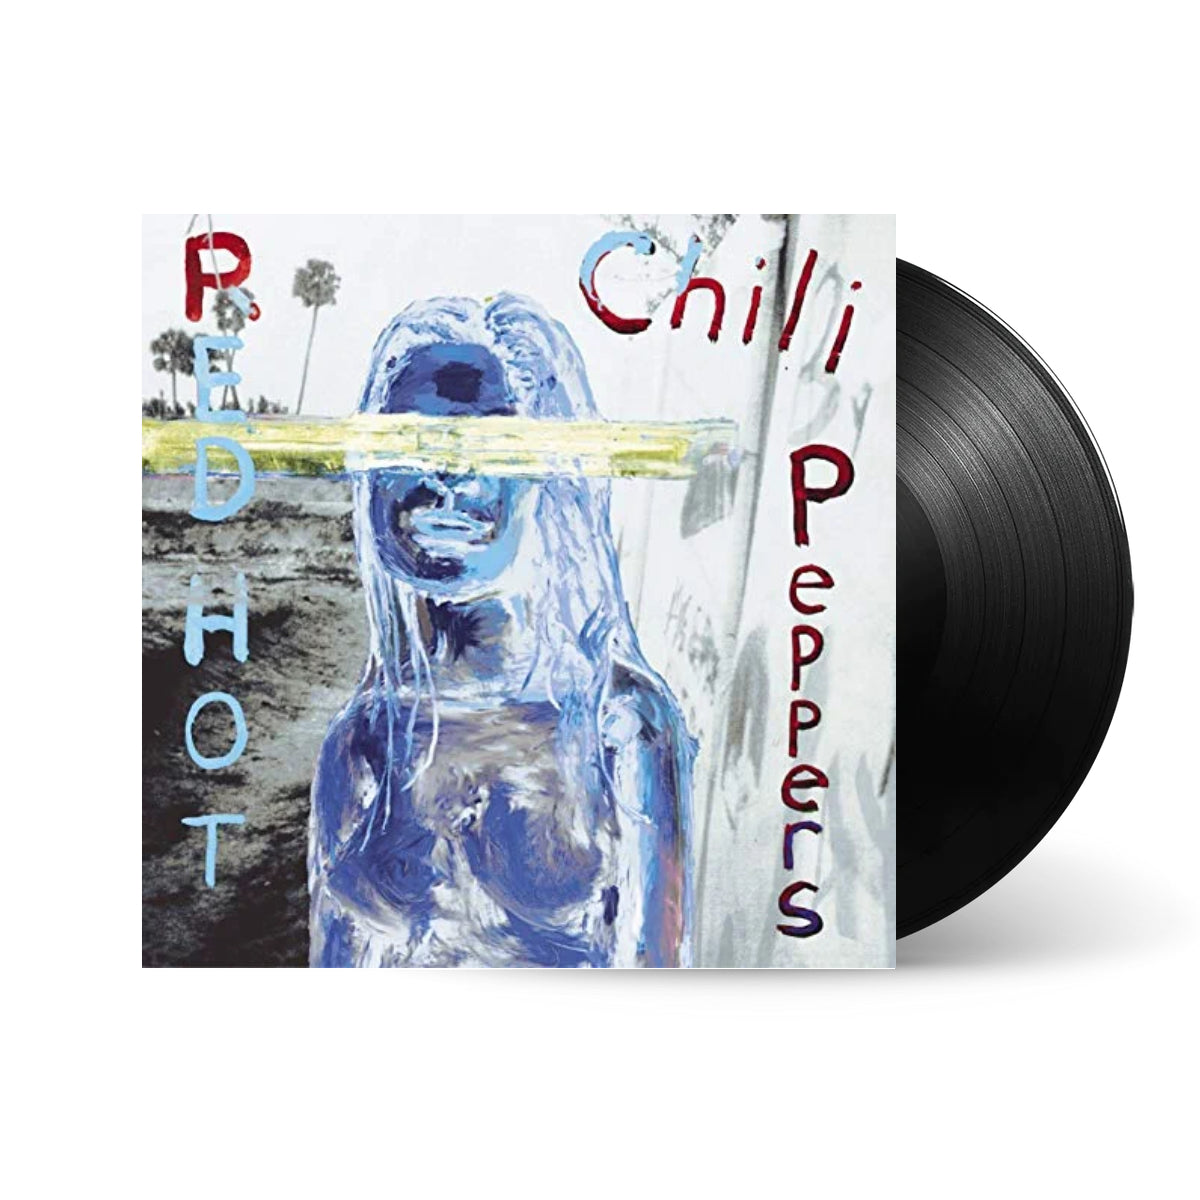 Red Hot Chili Peppers - By The Way: Vinyl LP